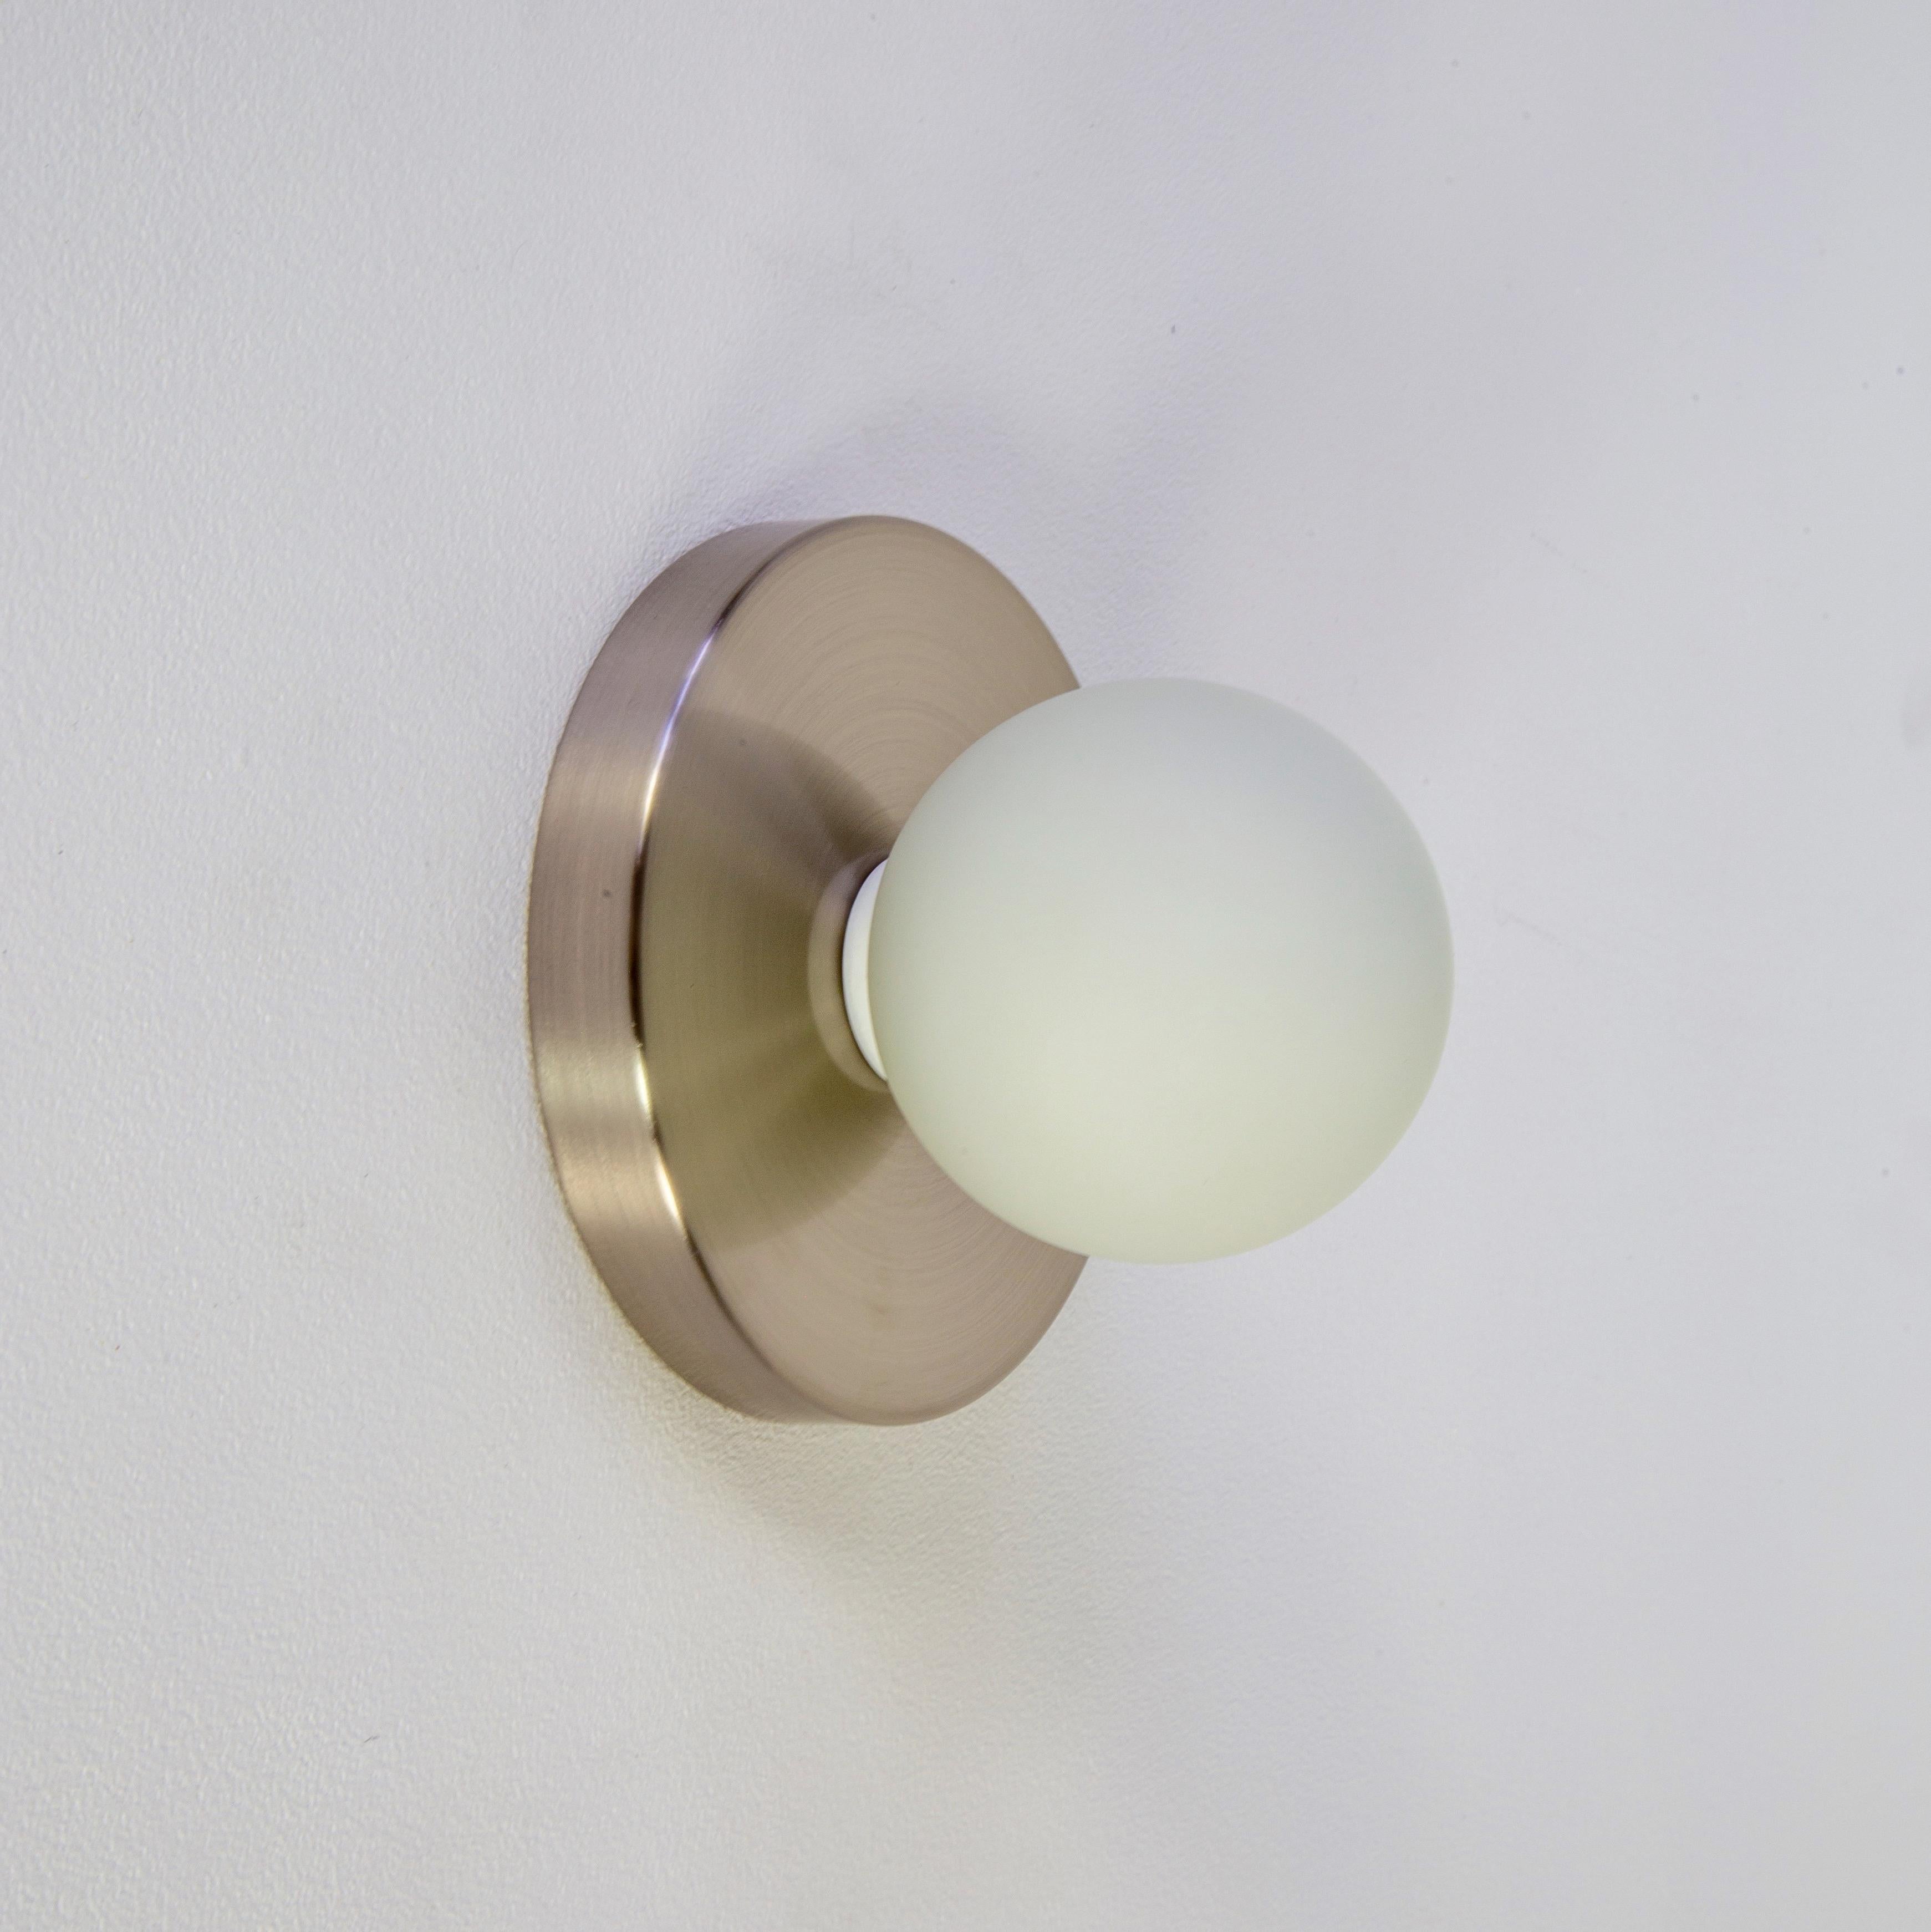 Plated Pair of Globe Sconces by Research.Lighting, Brushed Nickel, Made to Order For Sale